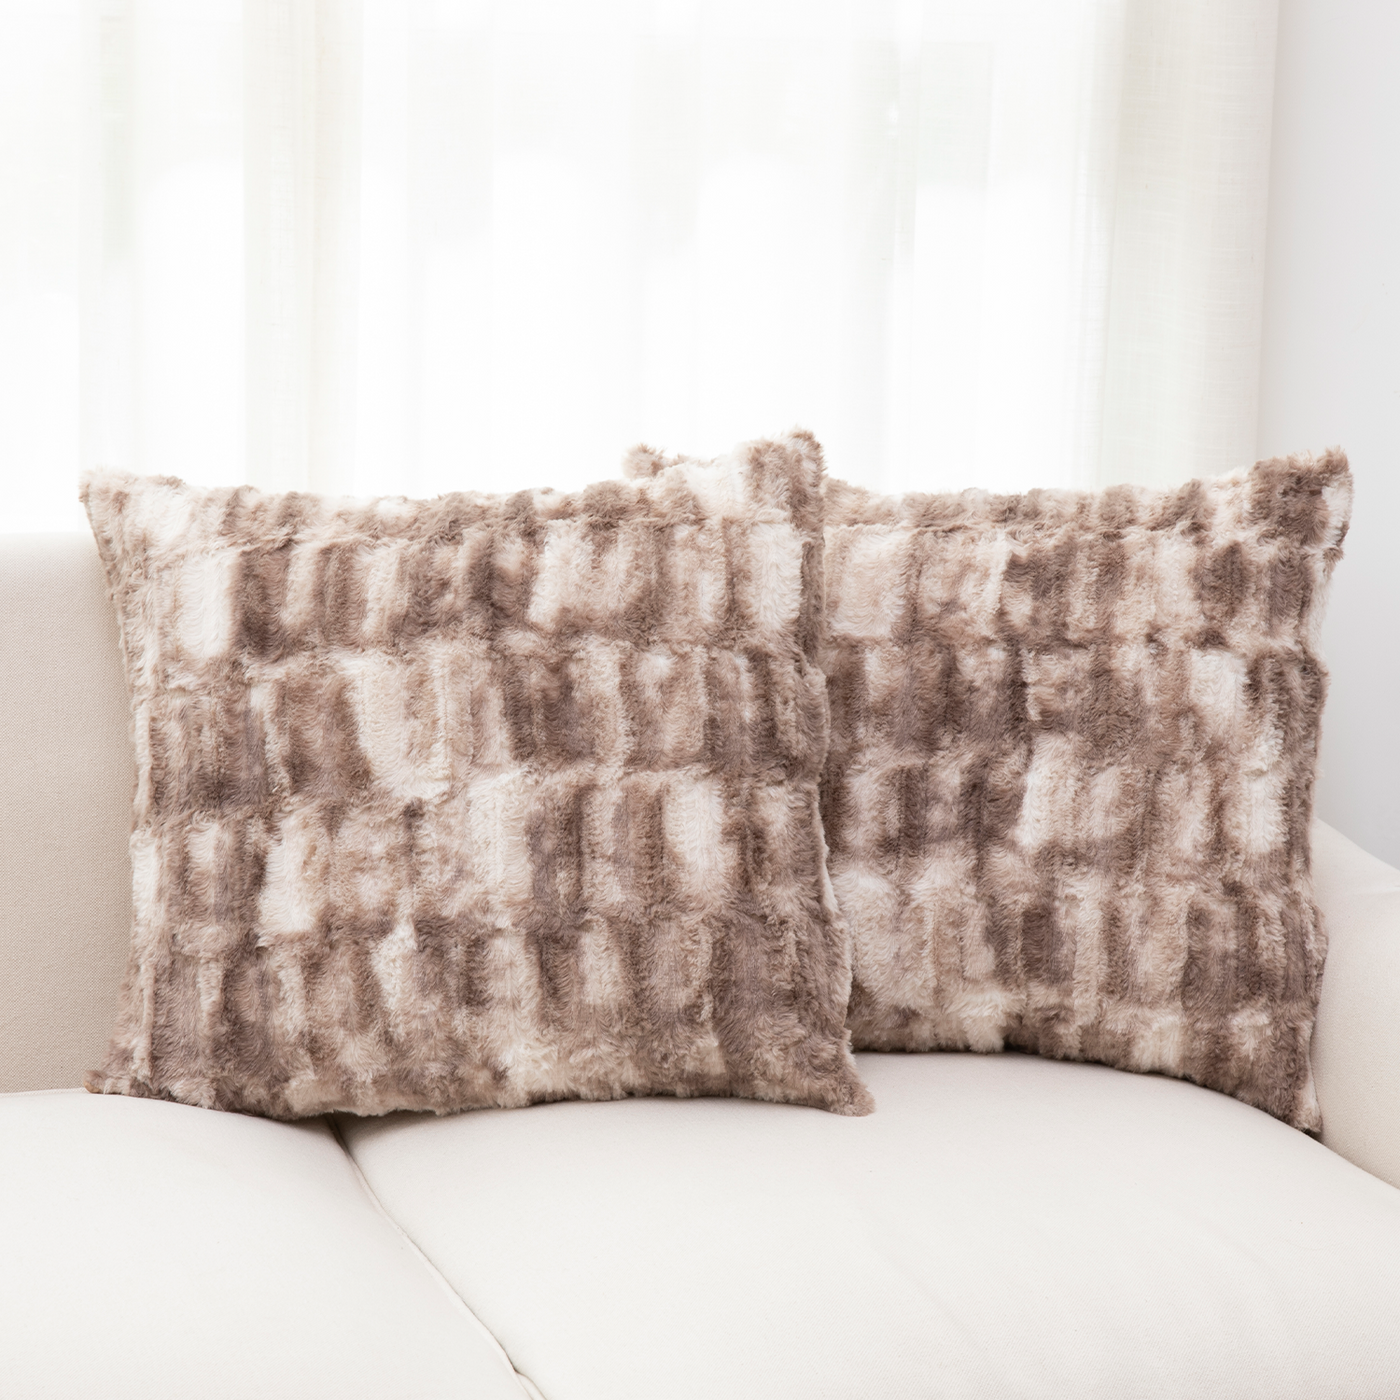 Cheer Collection Feather Down Sham And Throw Pillow Inserts - Set